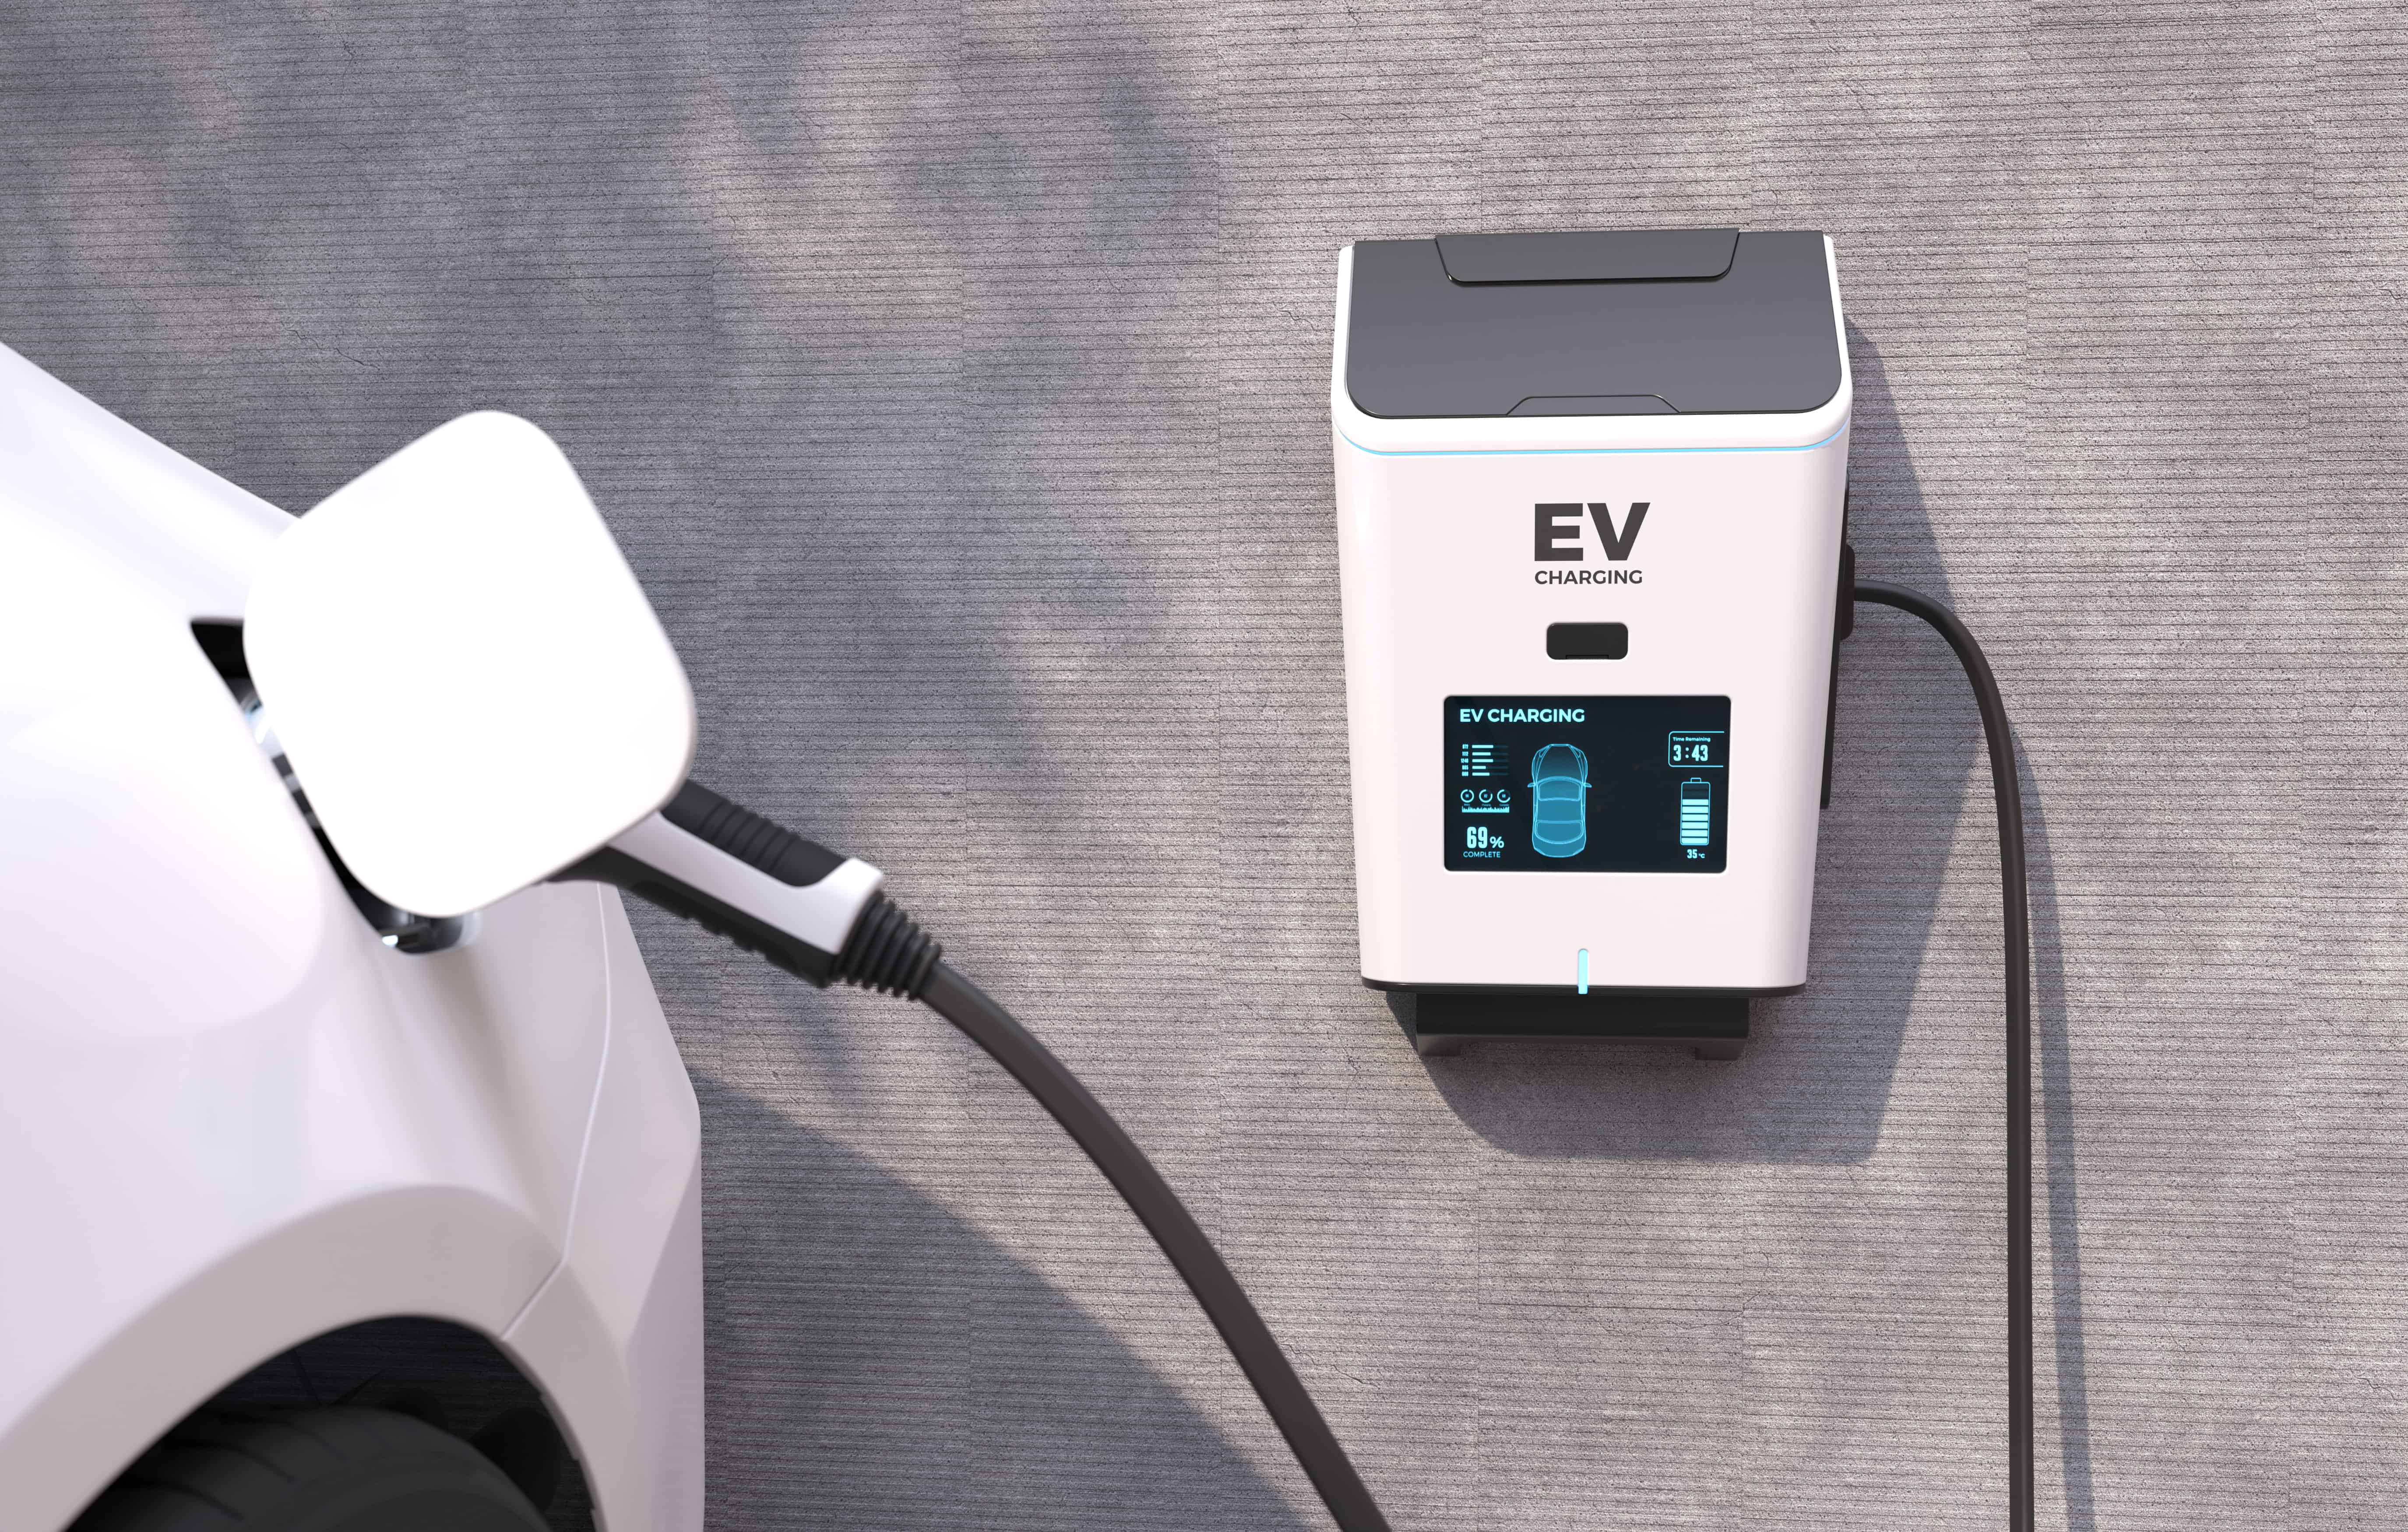 Why buyEV: How Long to Install EV Home Charger